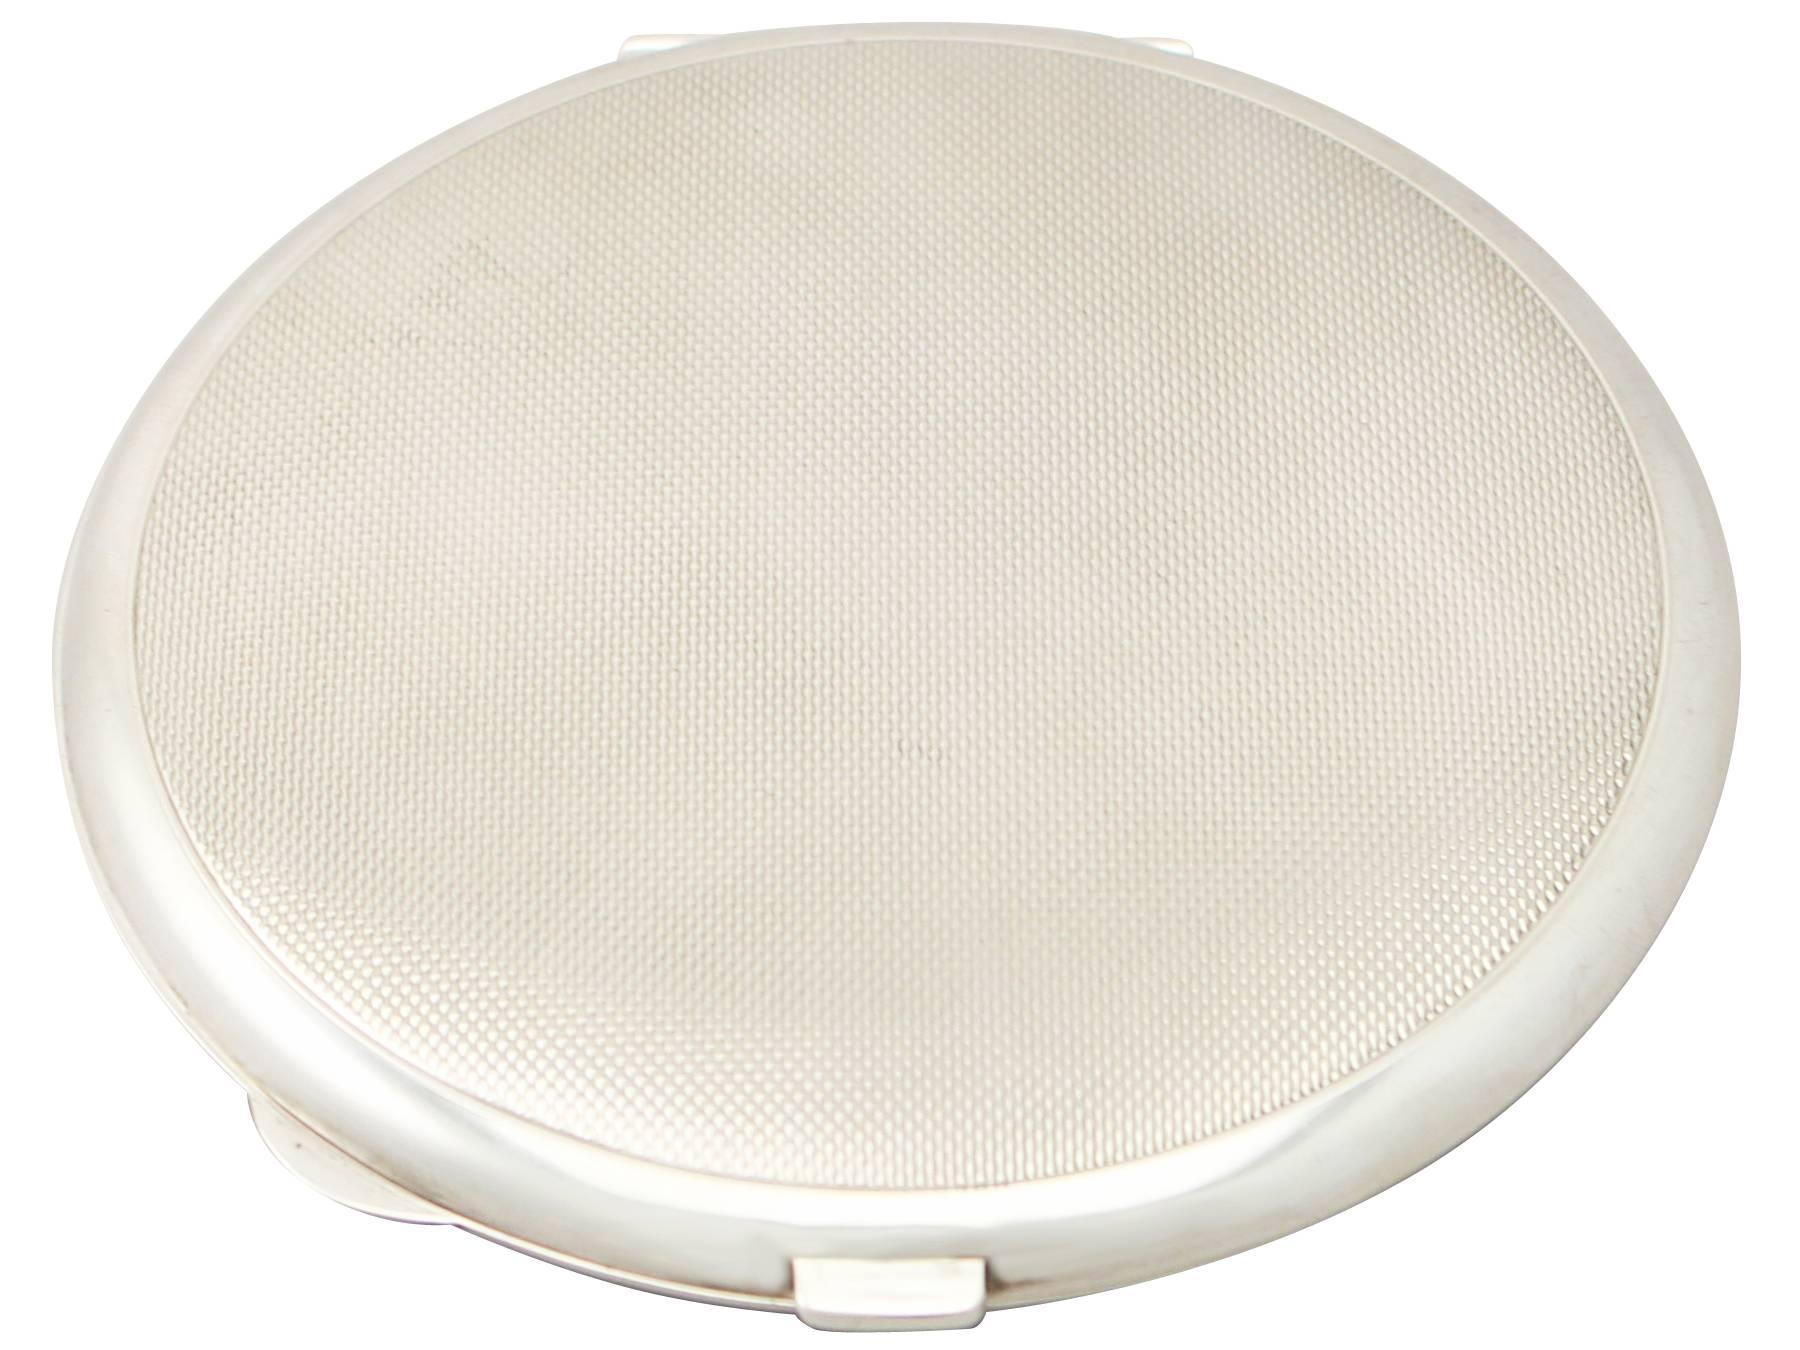 An exceptional, fine and impressive vintage George VI English sterling silver and enamel compact; an addition to our ornamental silverware collection

This fine vintage George VI sterling silver and guilloche enamel compact has a circular rounded